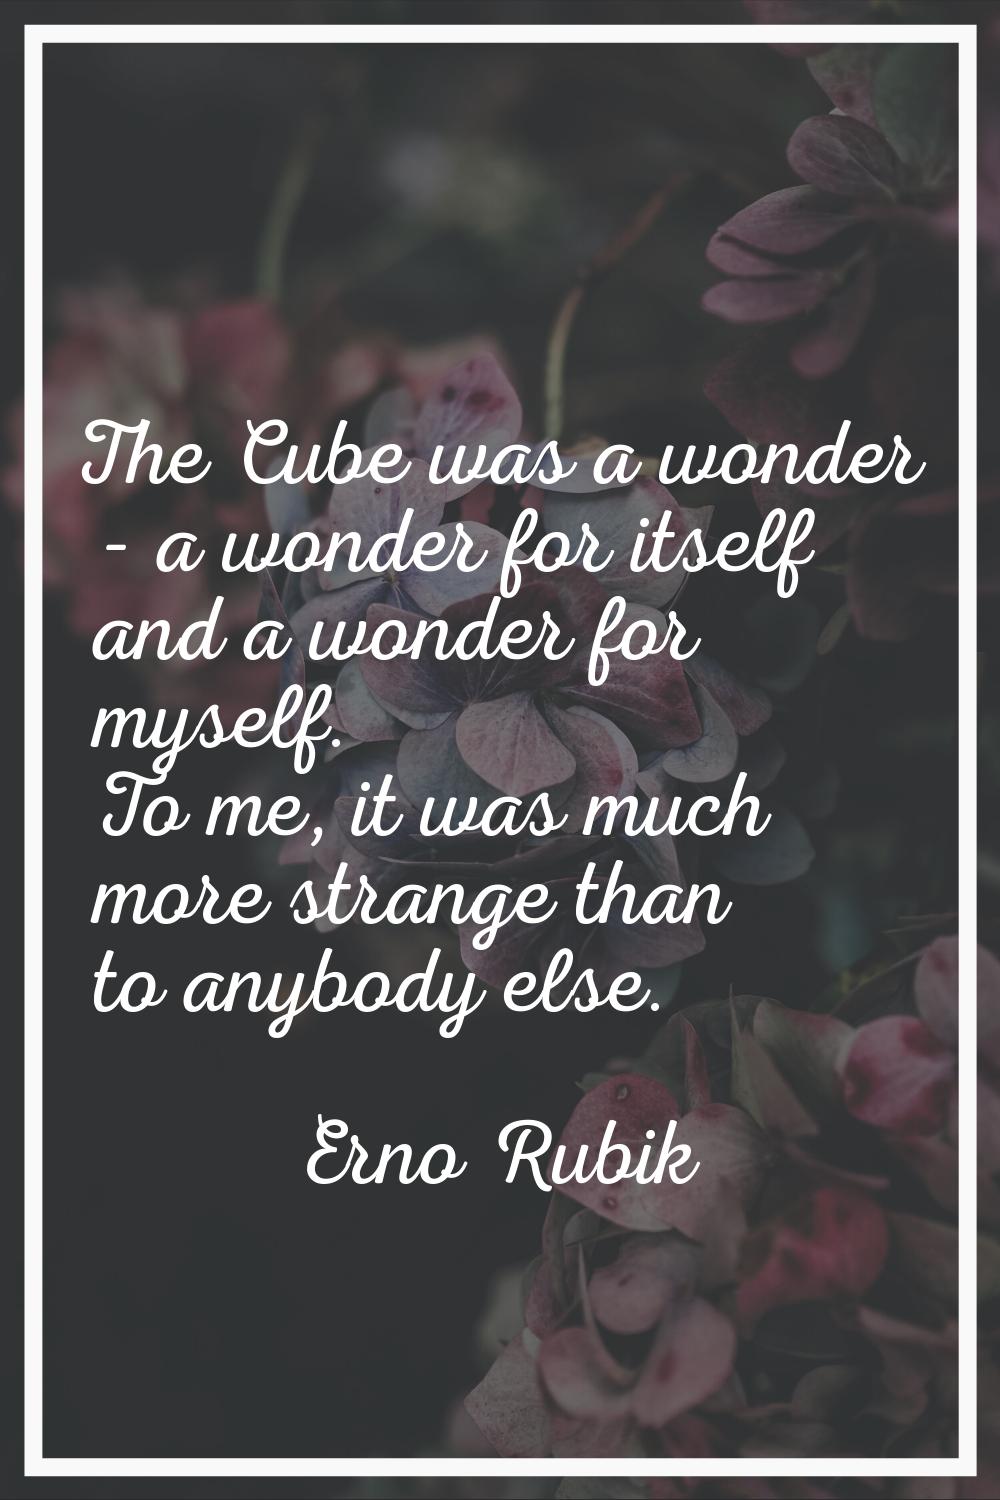 The Cube was a wonder - a wonder for itself and a wonder for myself. To me, it was much more strang